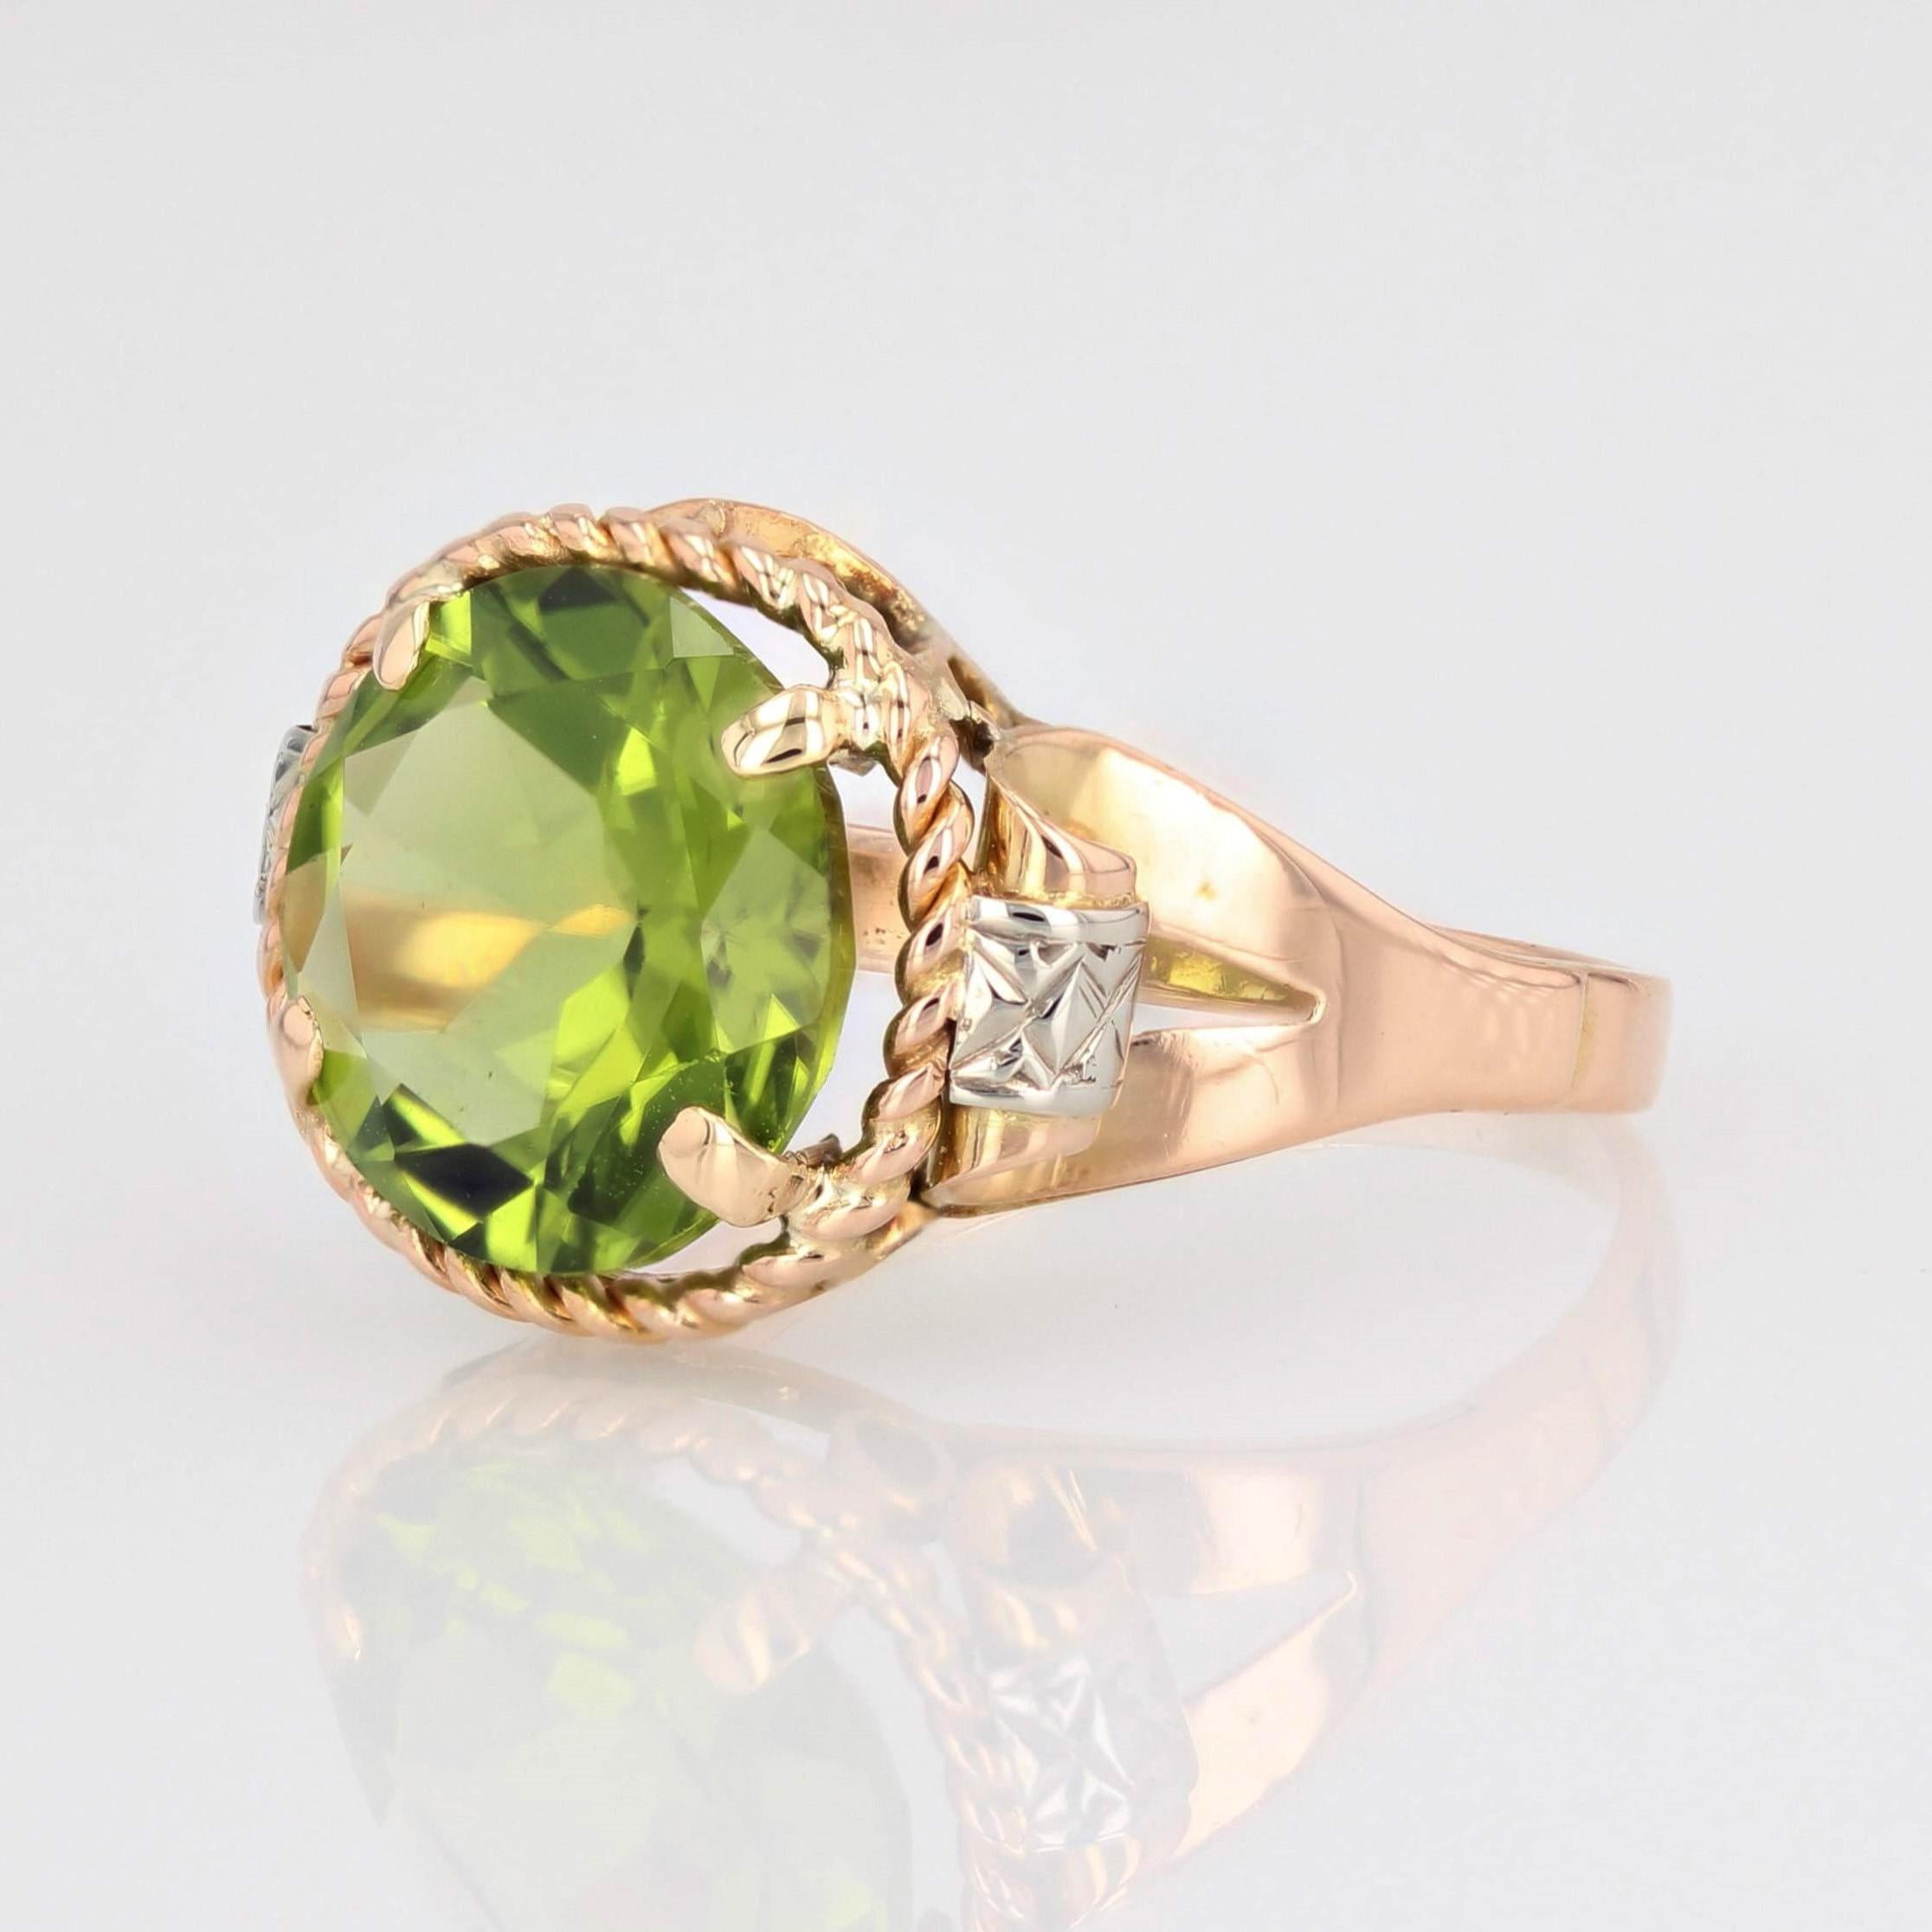 French 1950s 4.20 Carats Peridot 18 Karat Rose Gold Retro Ring For Sale 4